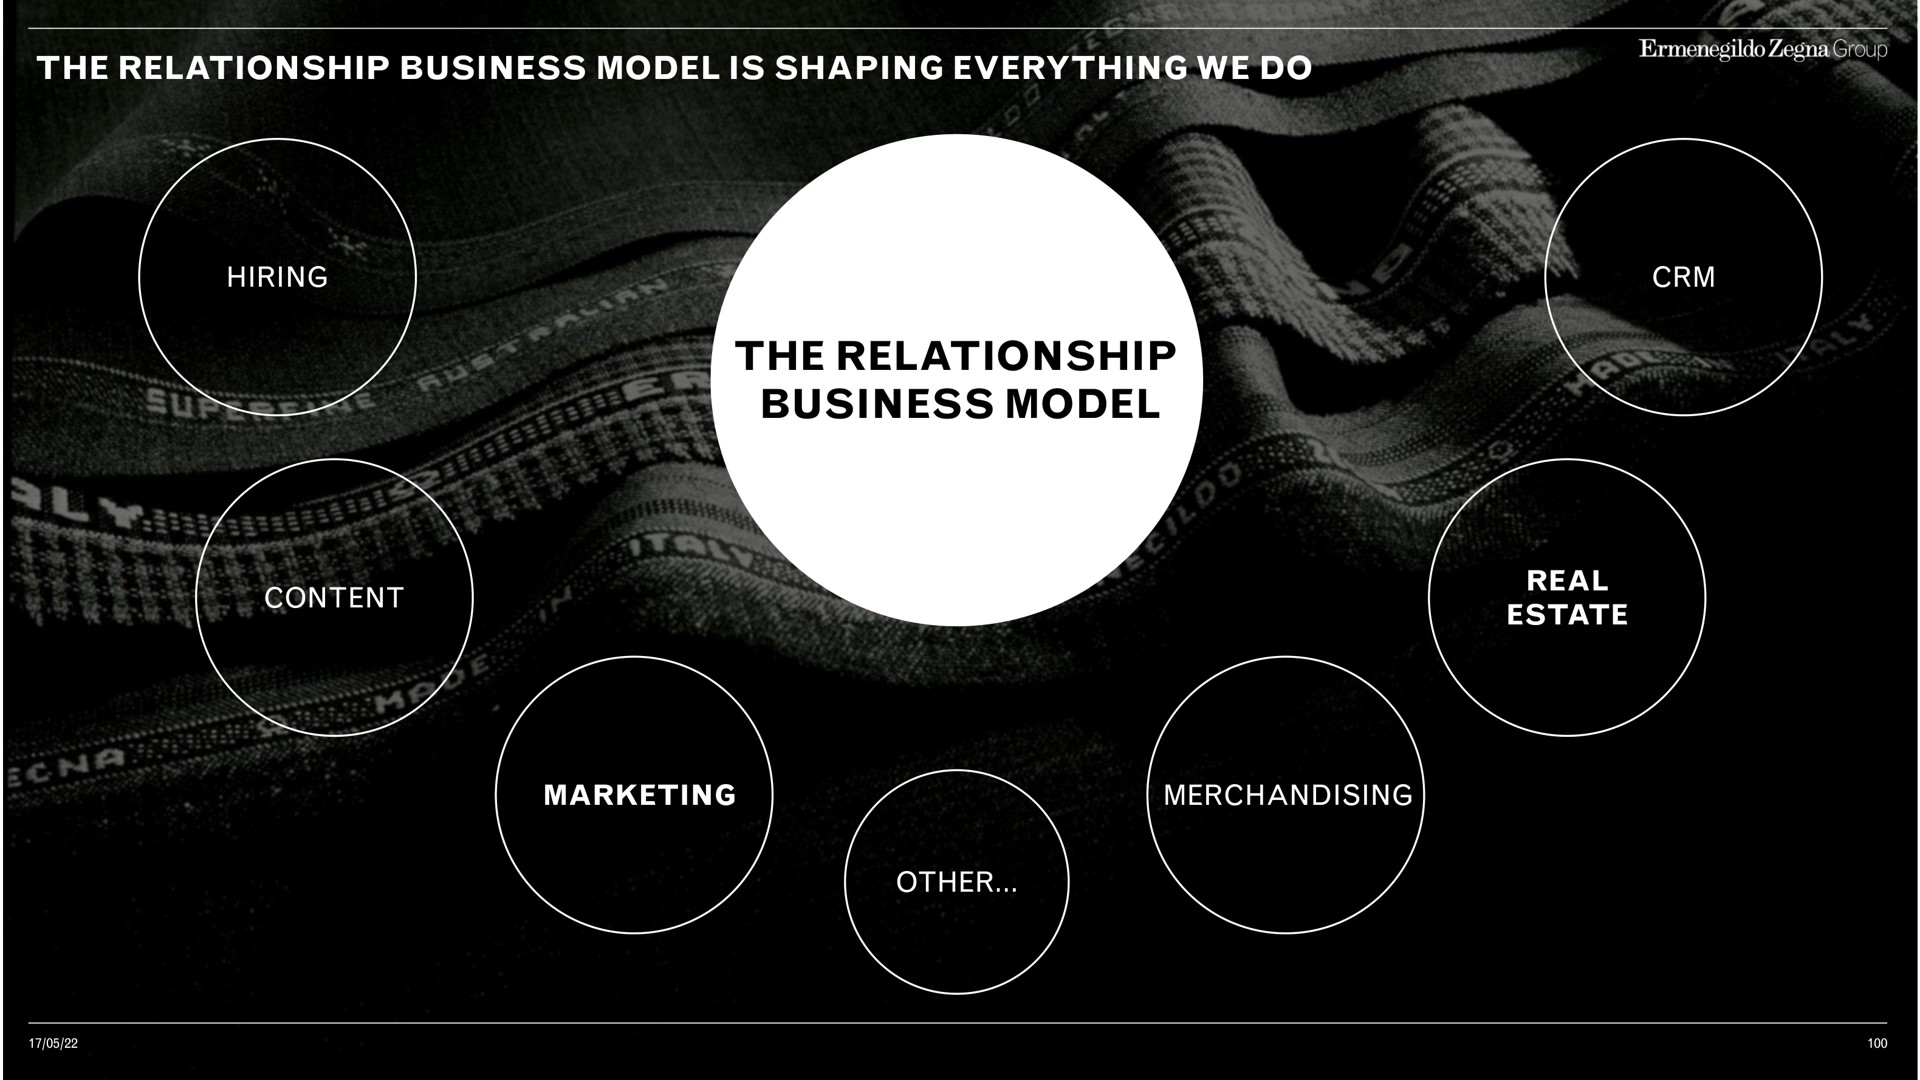 the relationship business model shaping everything we do | Zegna